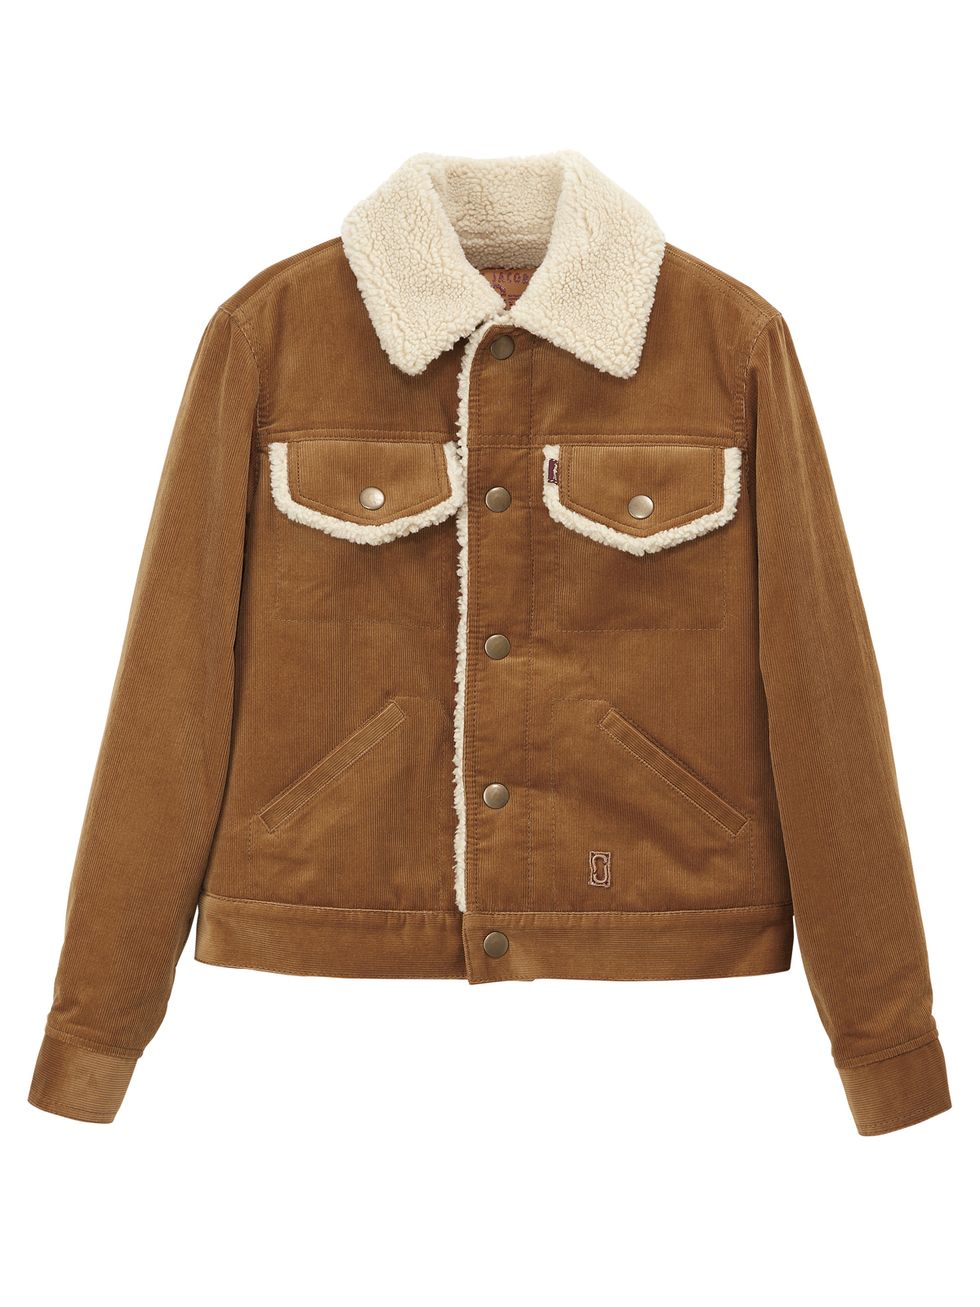 Clothing, Jacket, Outerwear, Sleeve, Tan, Brown, Leather, Beige, Leather jacket, Fur, 